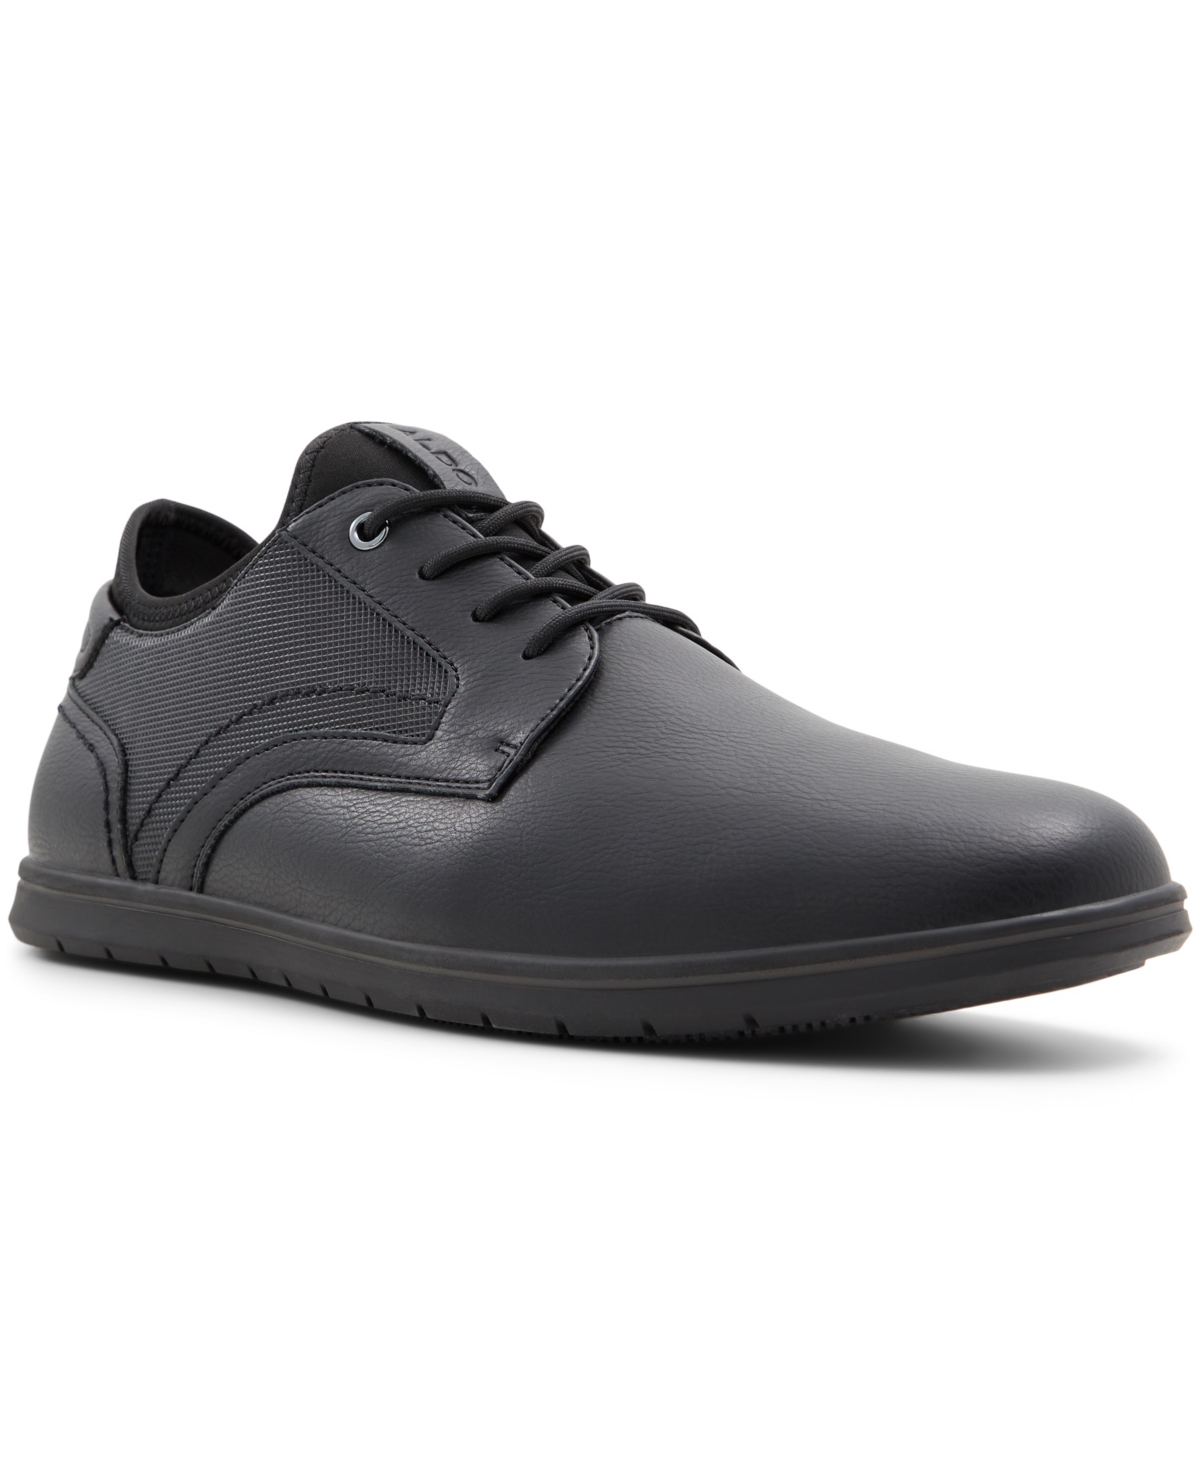 Men's Carnaby Casual Lace Up Sneaker - Other Black